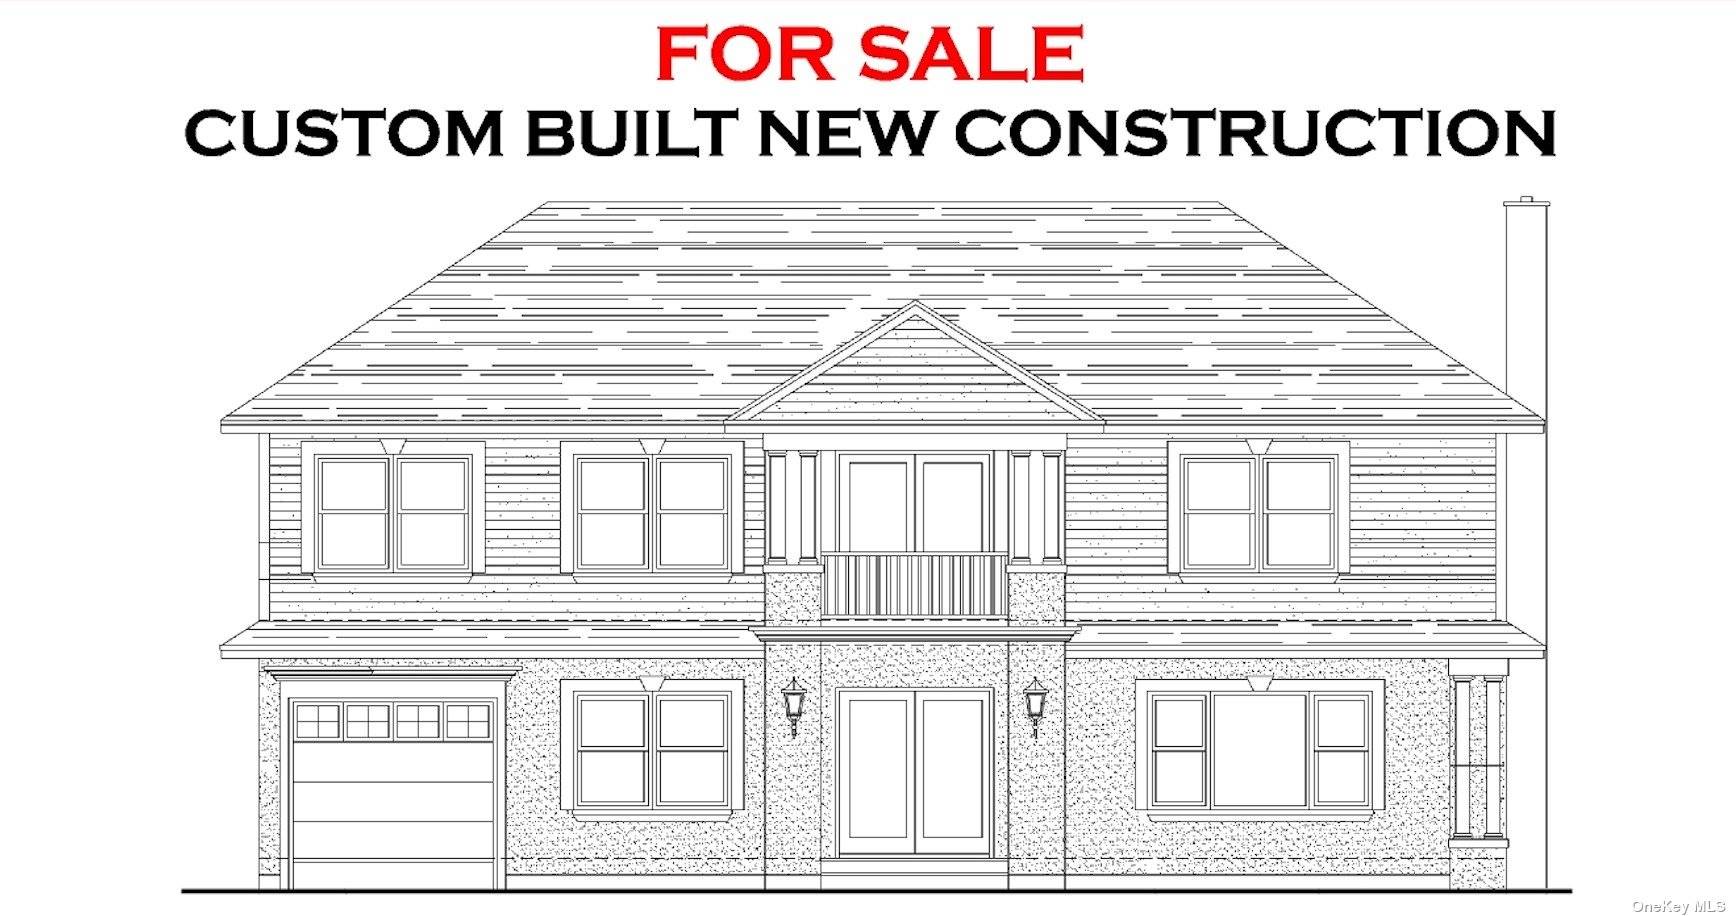 Being Built By The Well Renowned Sun Luxury Homes, This Desired North Facing Brand New Colonial Features A Massive Eat In Kitchen, Living Room, Family Room, Dining Room, Covered Porch, ...